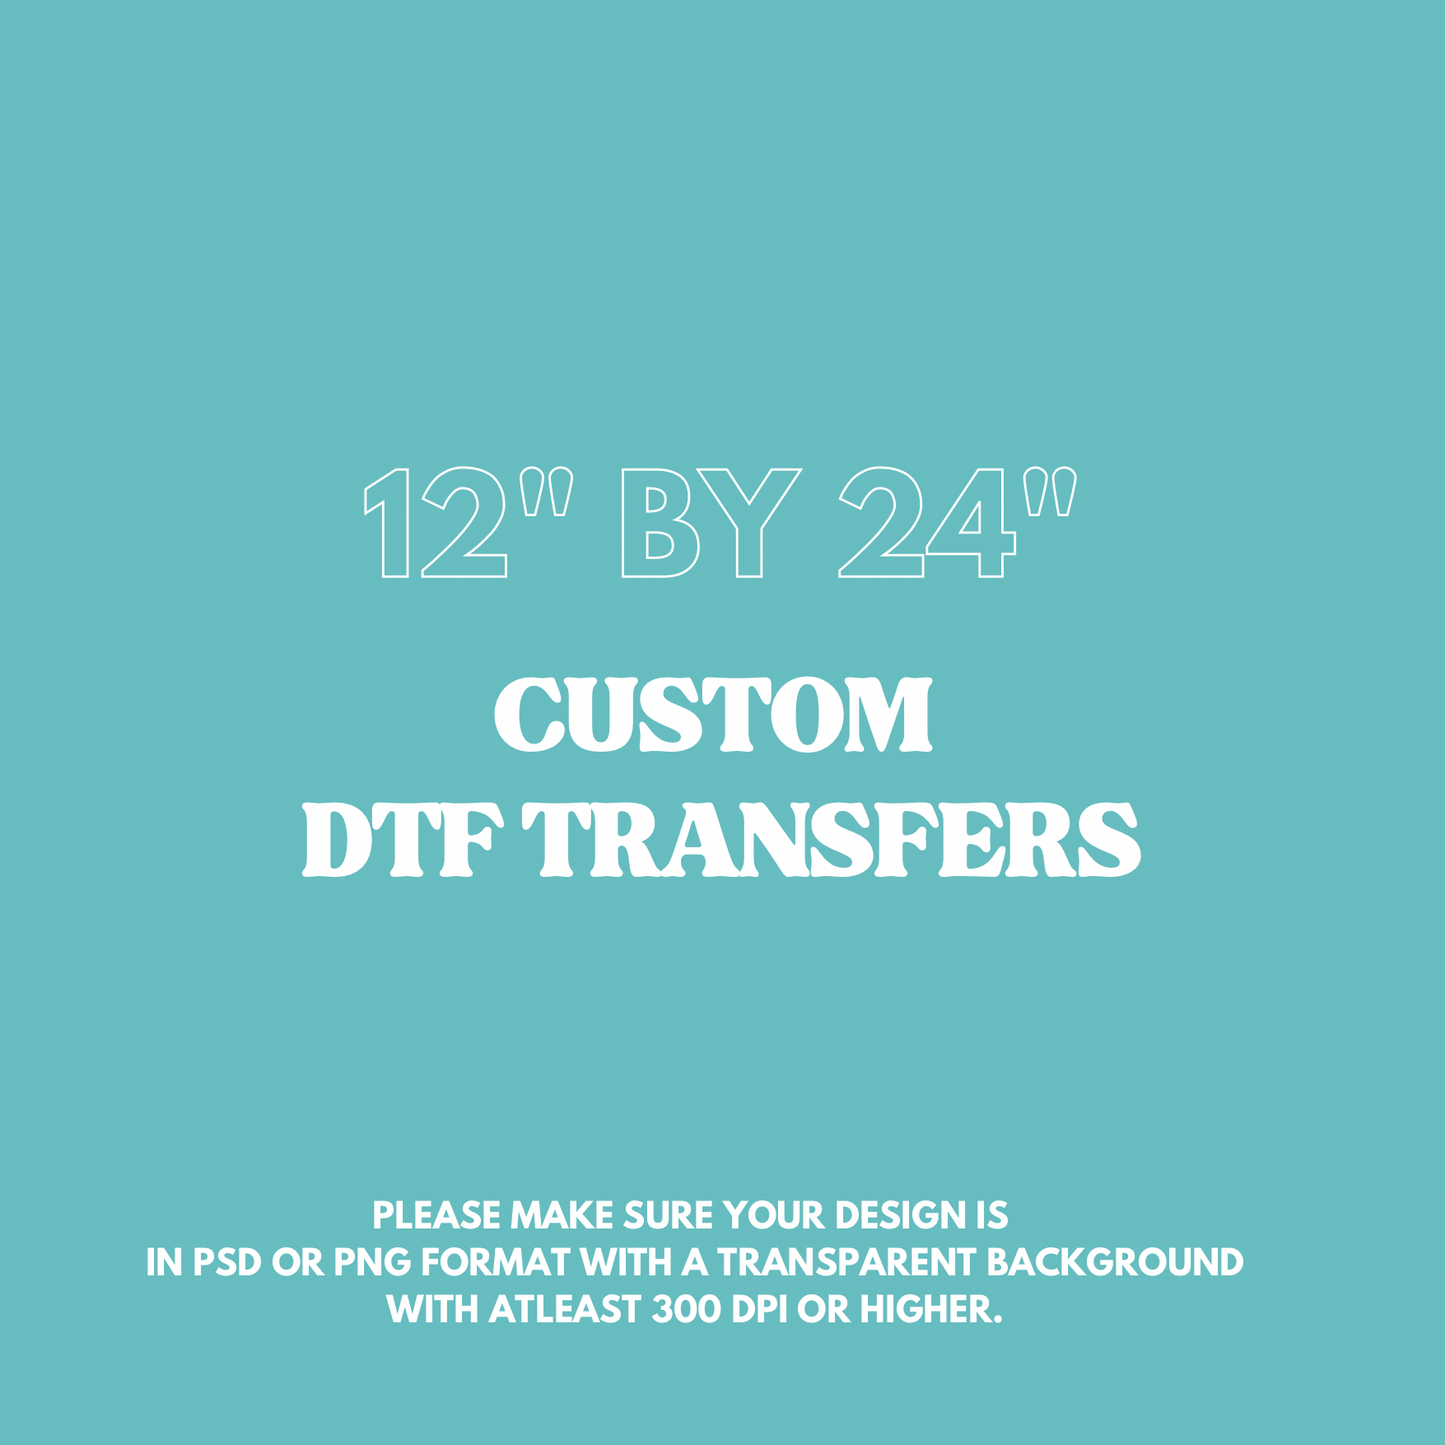 12" by 24": Upload your own DTF Gang sheet